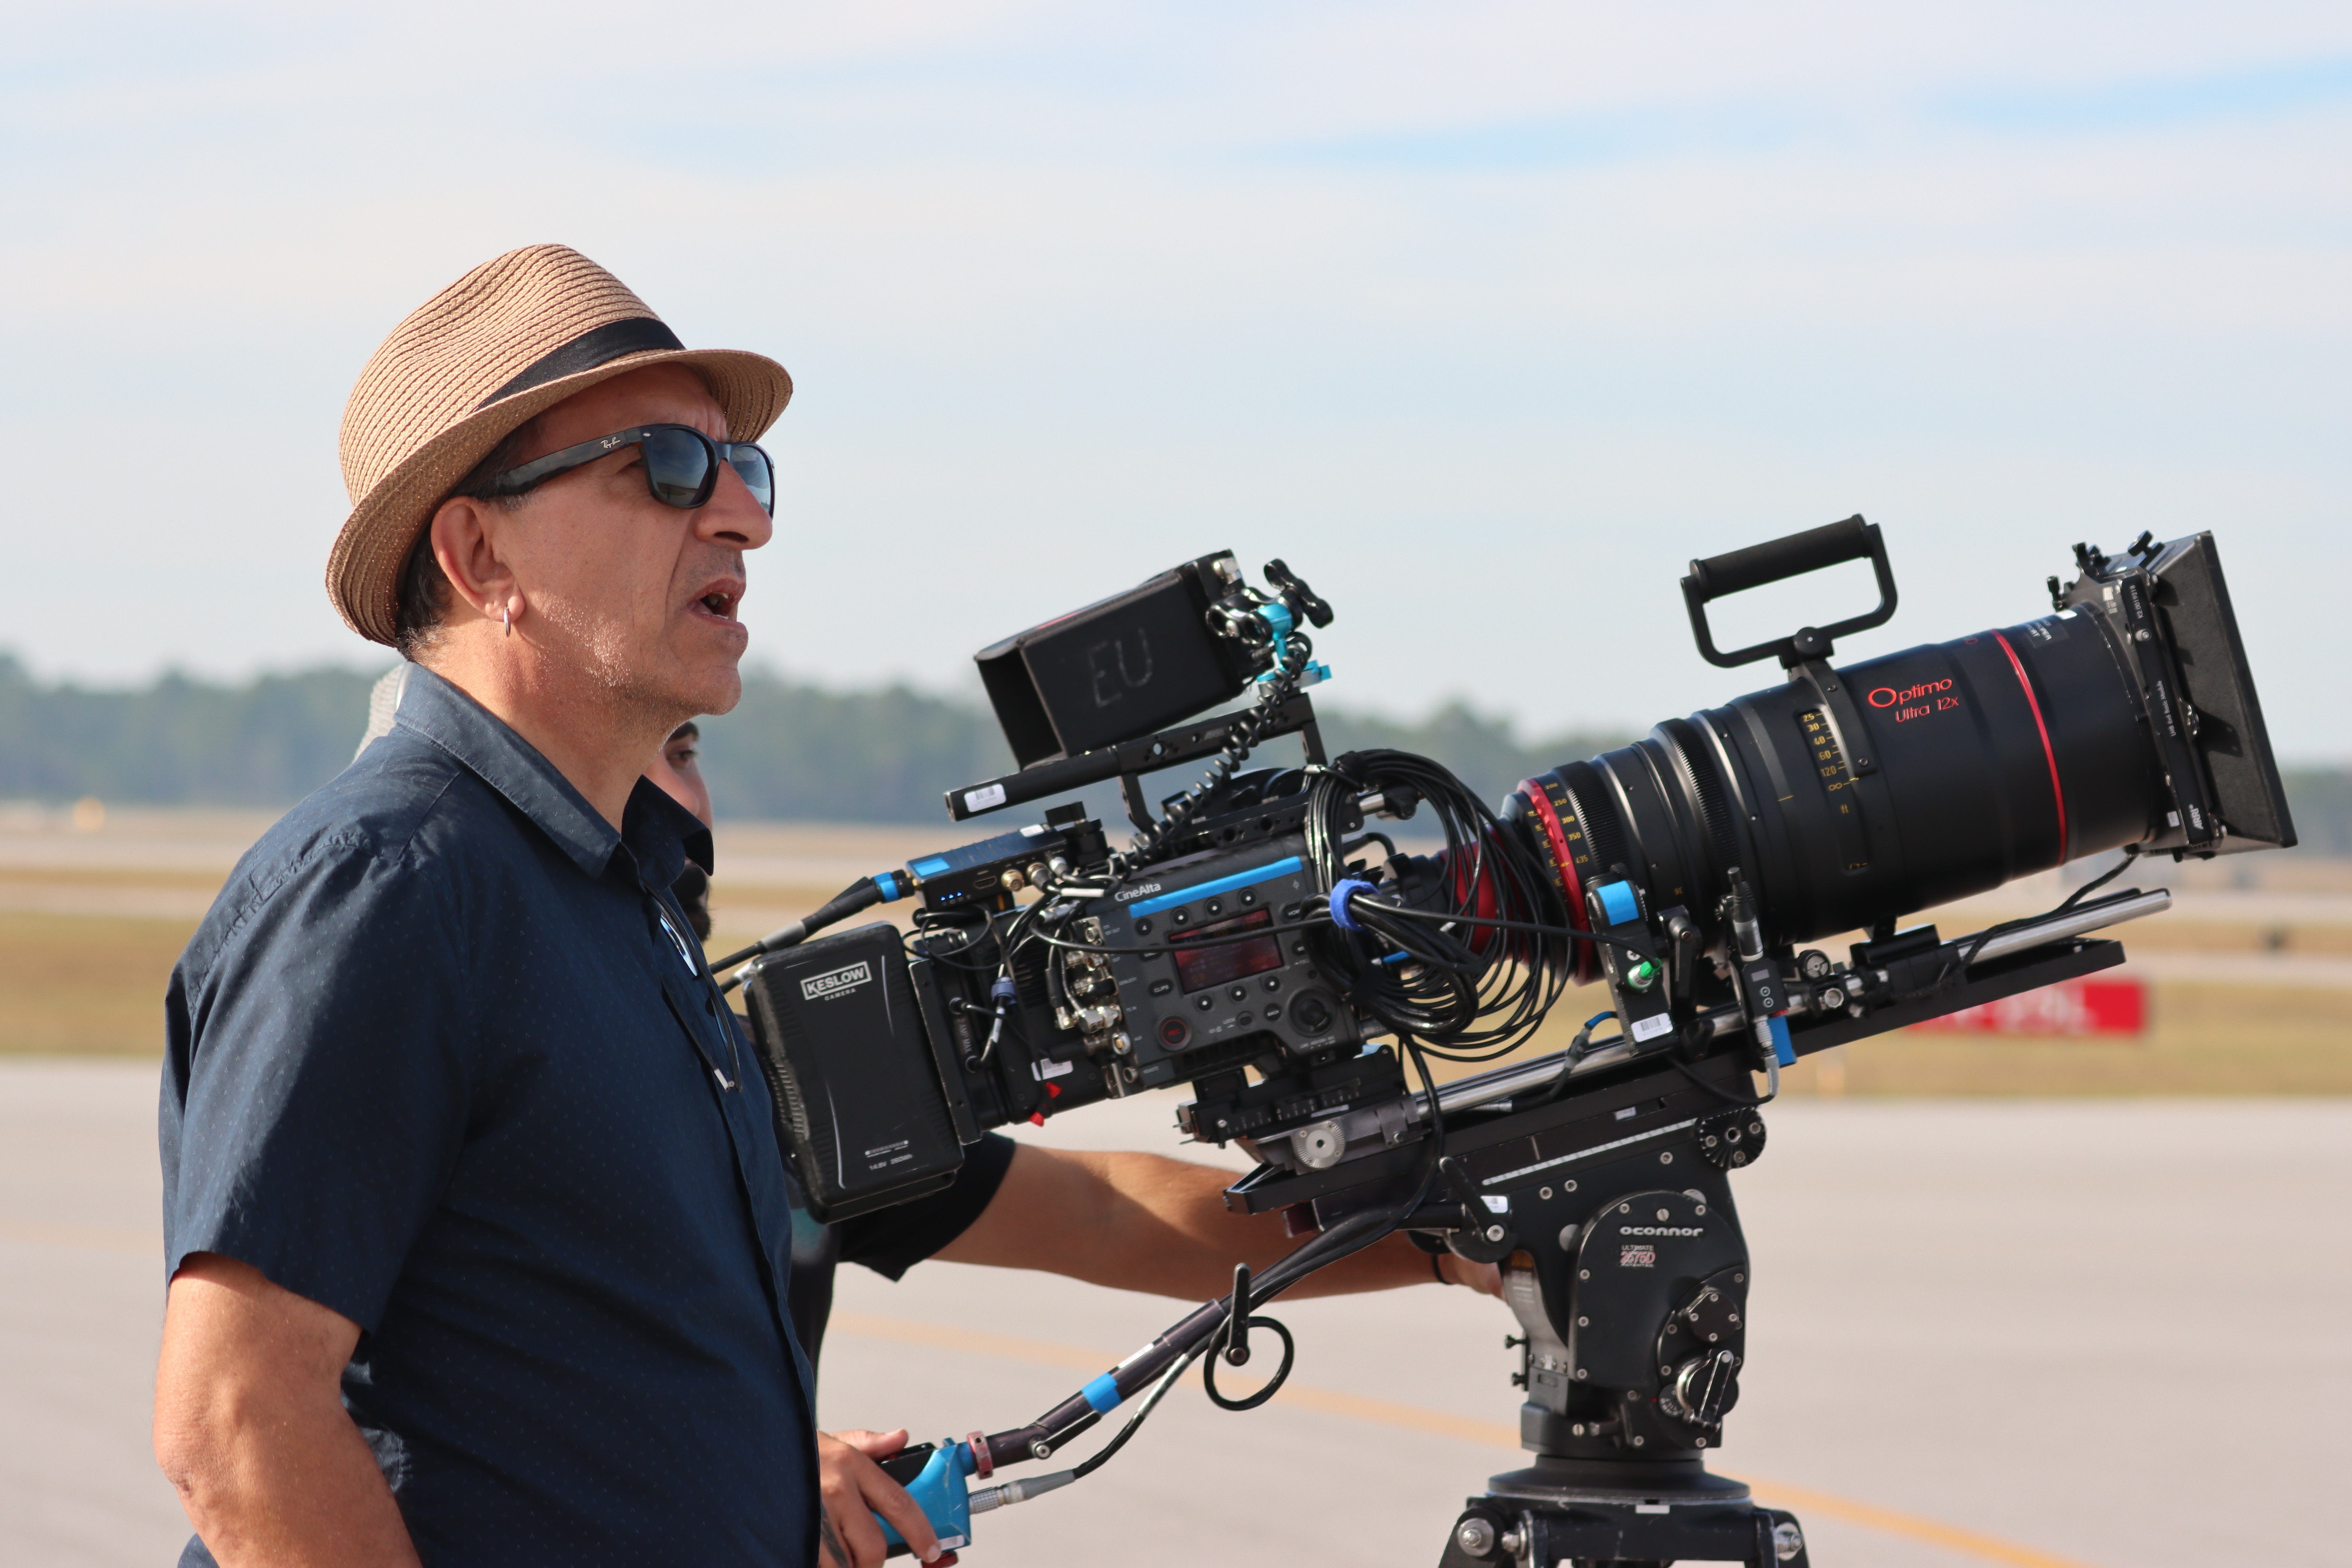 'Glad to be here': How the Blue Angels mantra inspired a film director's journey with team